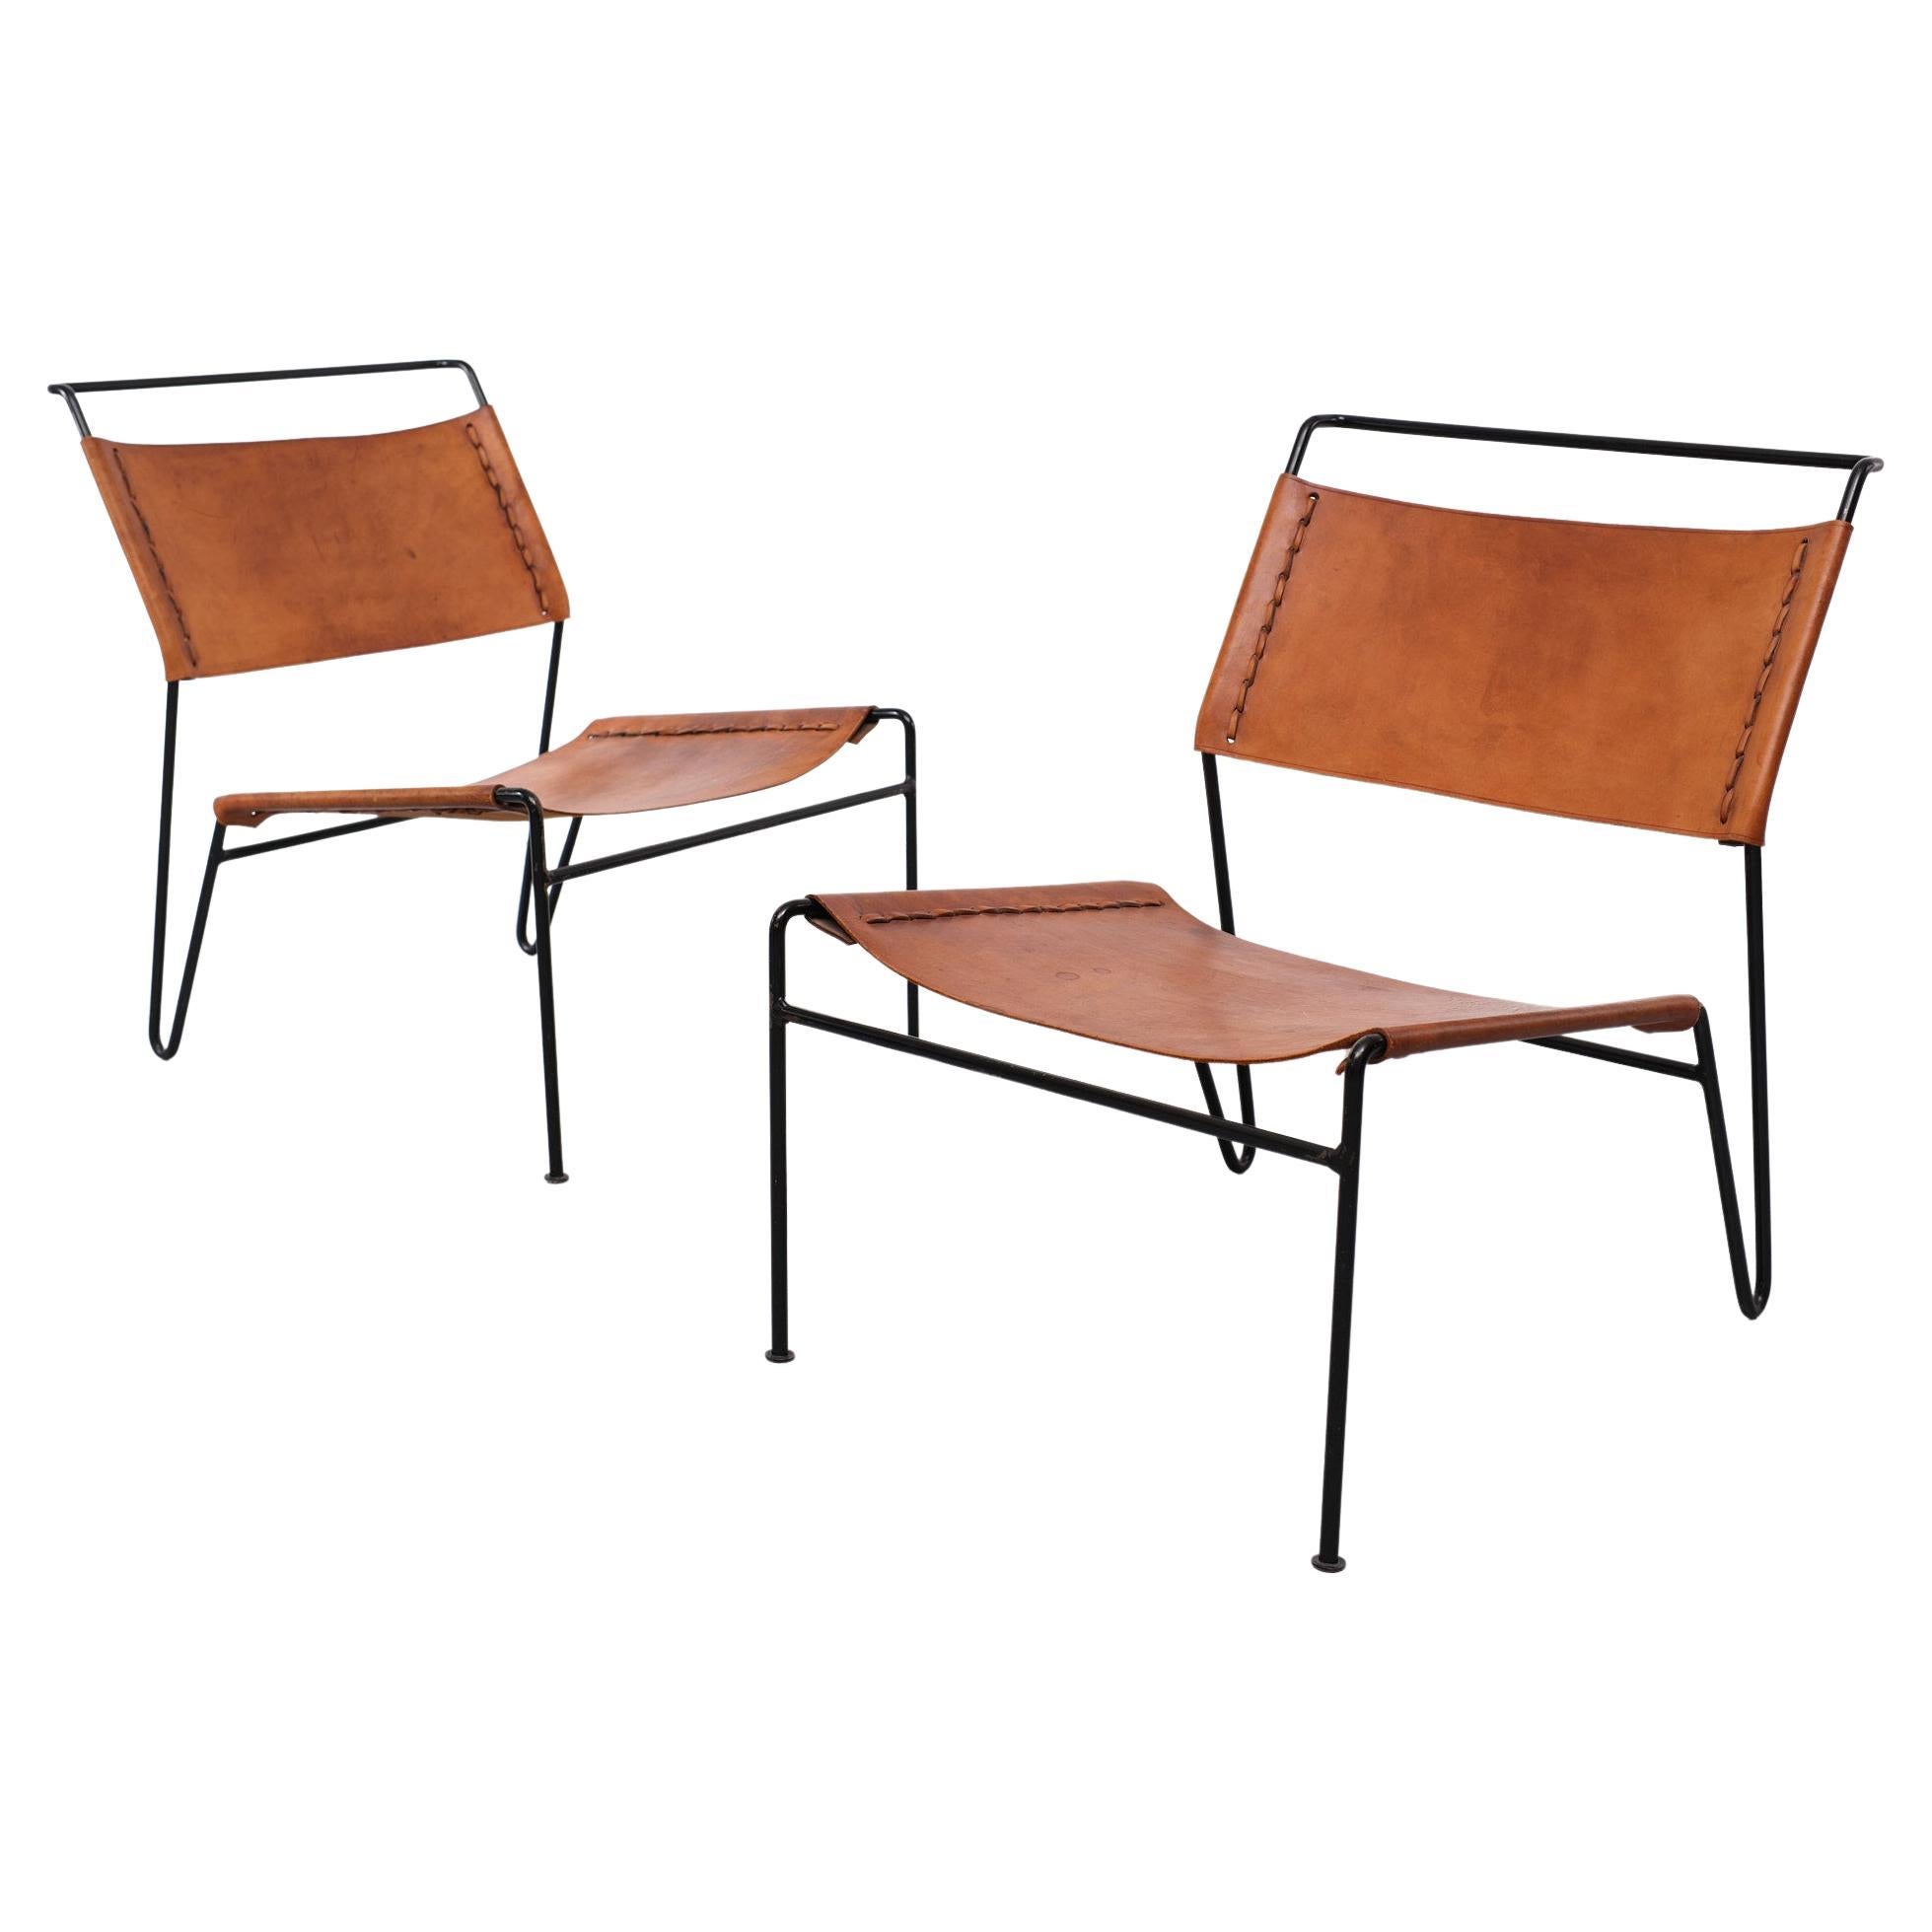 Pair of A. Dolleman Chairs for Metz & Co, Netherlands, 1950 For Sale